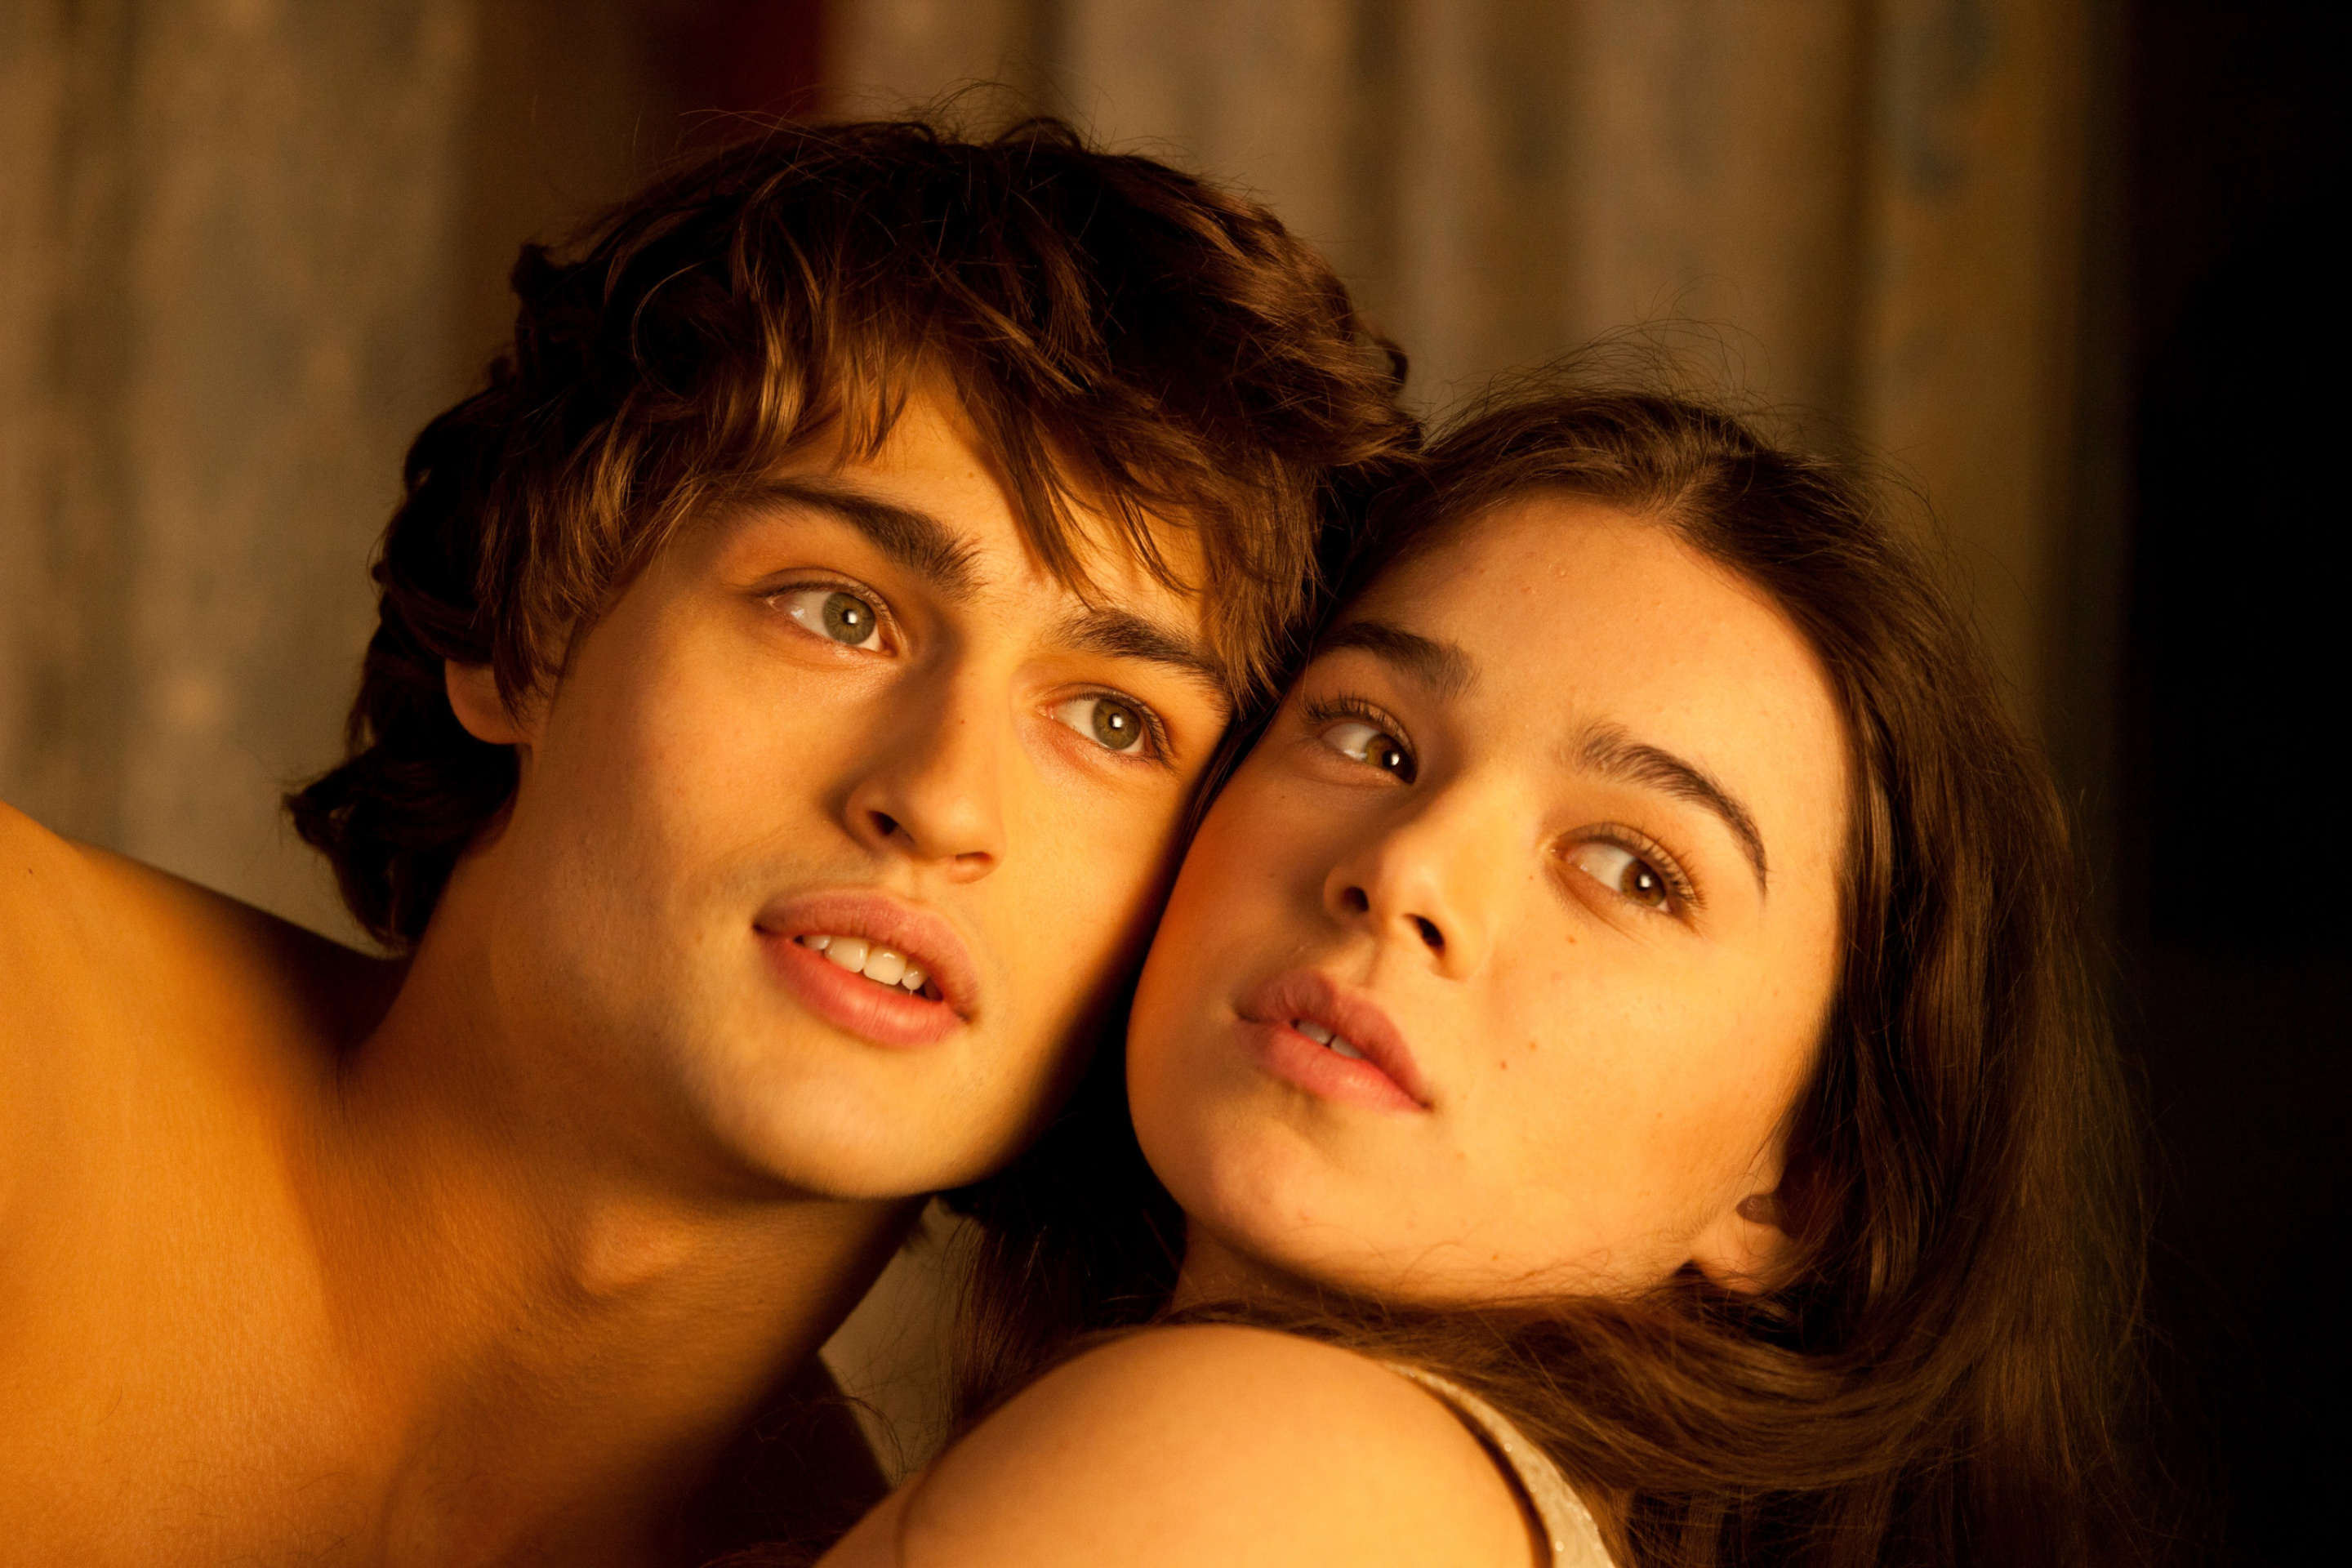 Romeo and Juliet with Hailee Steinfeld and Douglas Booth screenshot #1 2880x1920